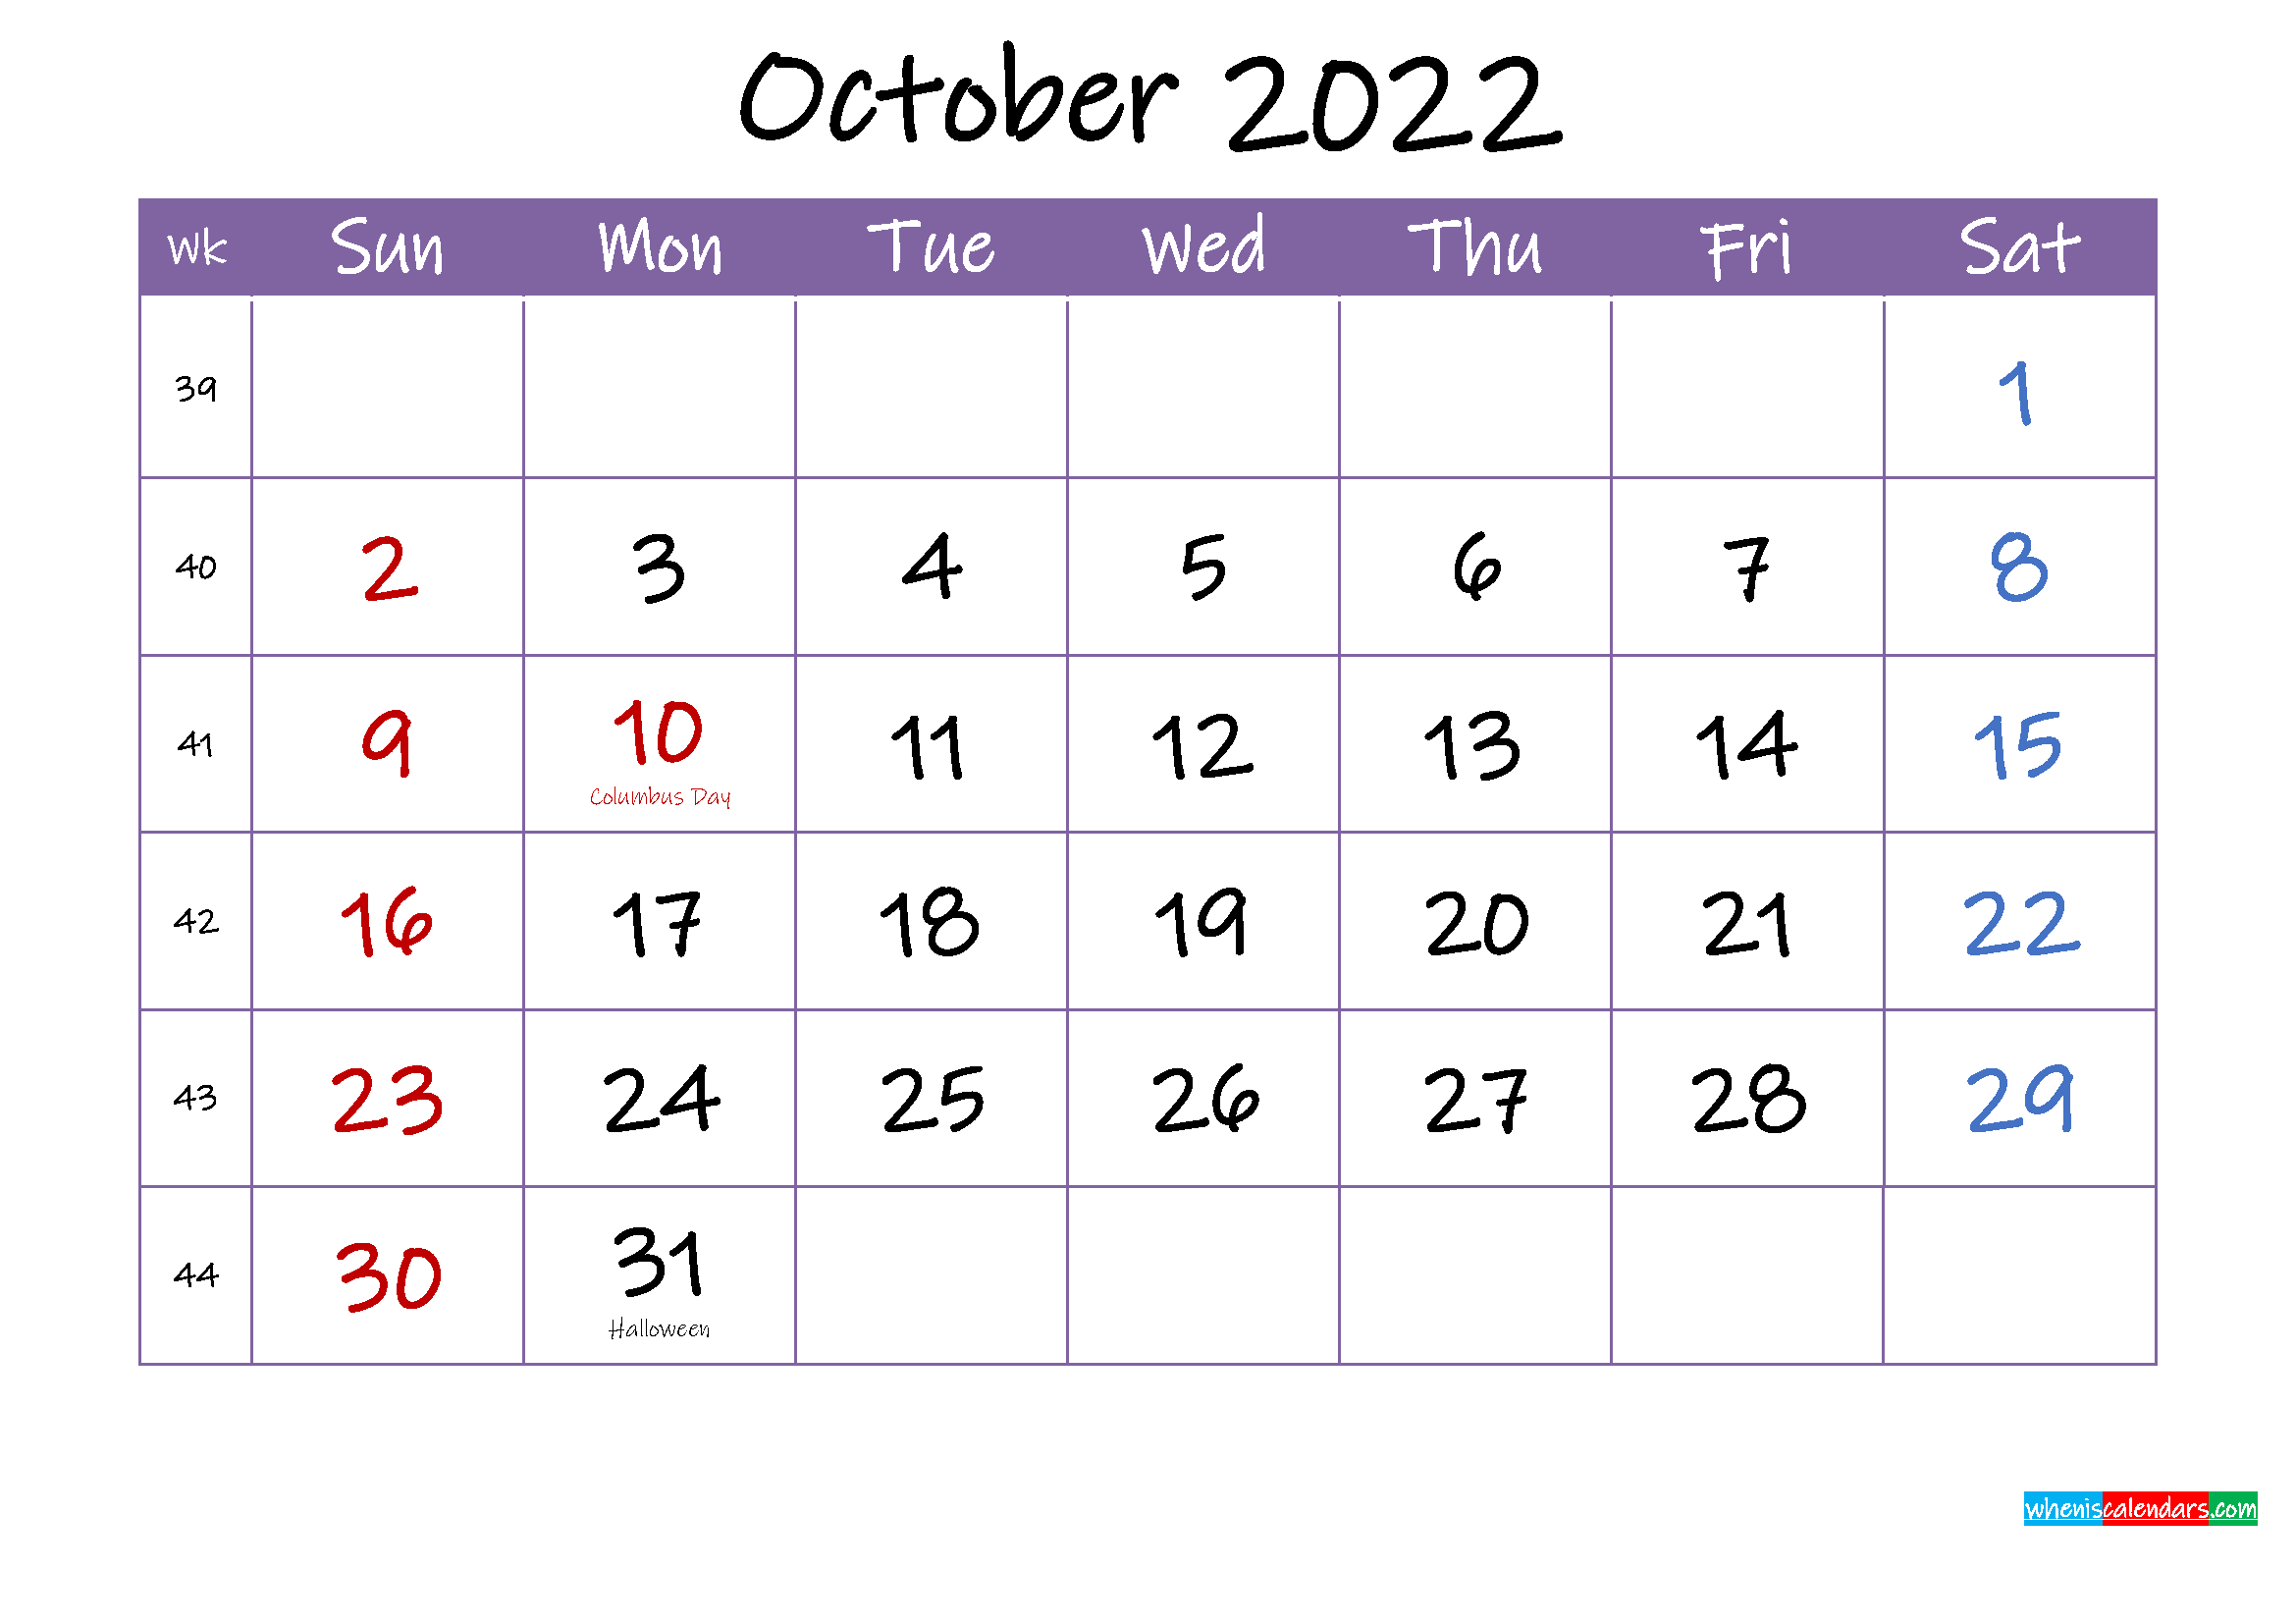 October 2022 Calendar With Holidays Printable - Template Ink22m58